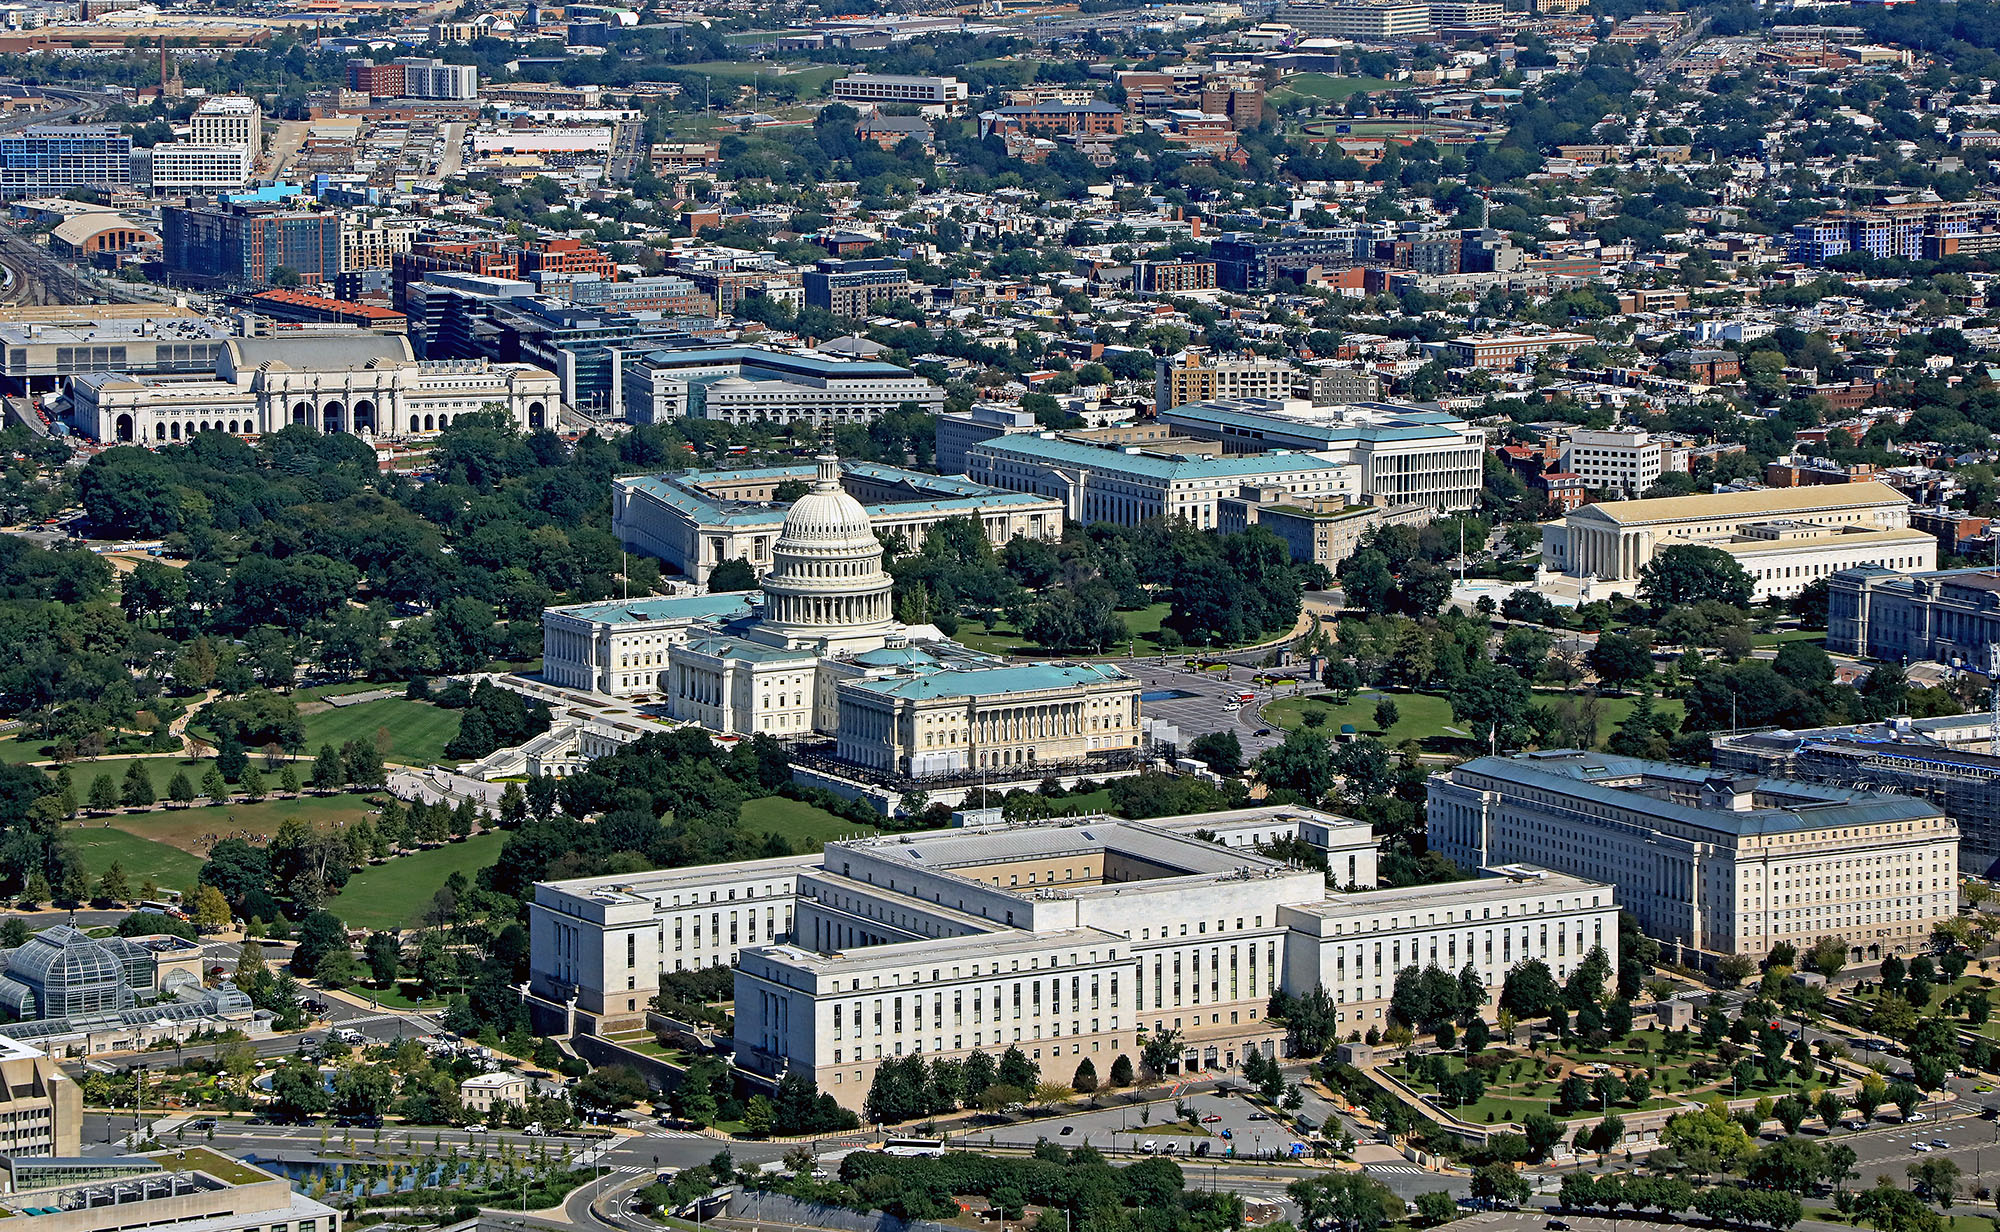 Low-altitude photograph of our nation's capital, showing the Capitol looking at the House Wing. The Botanical Gardens appear in left foreground. Note also the House and Senate office buildings.